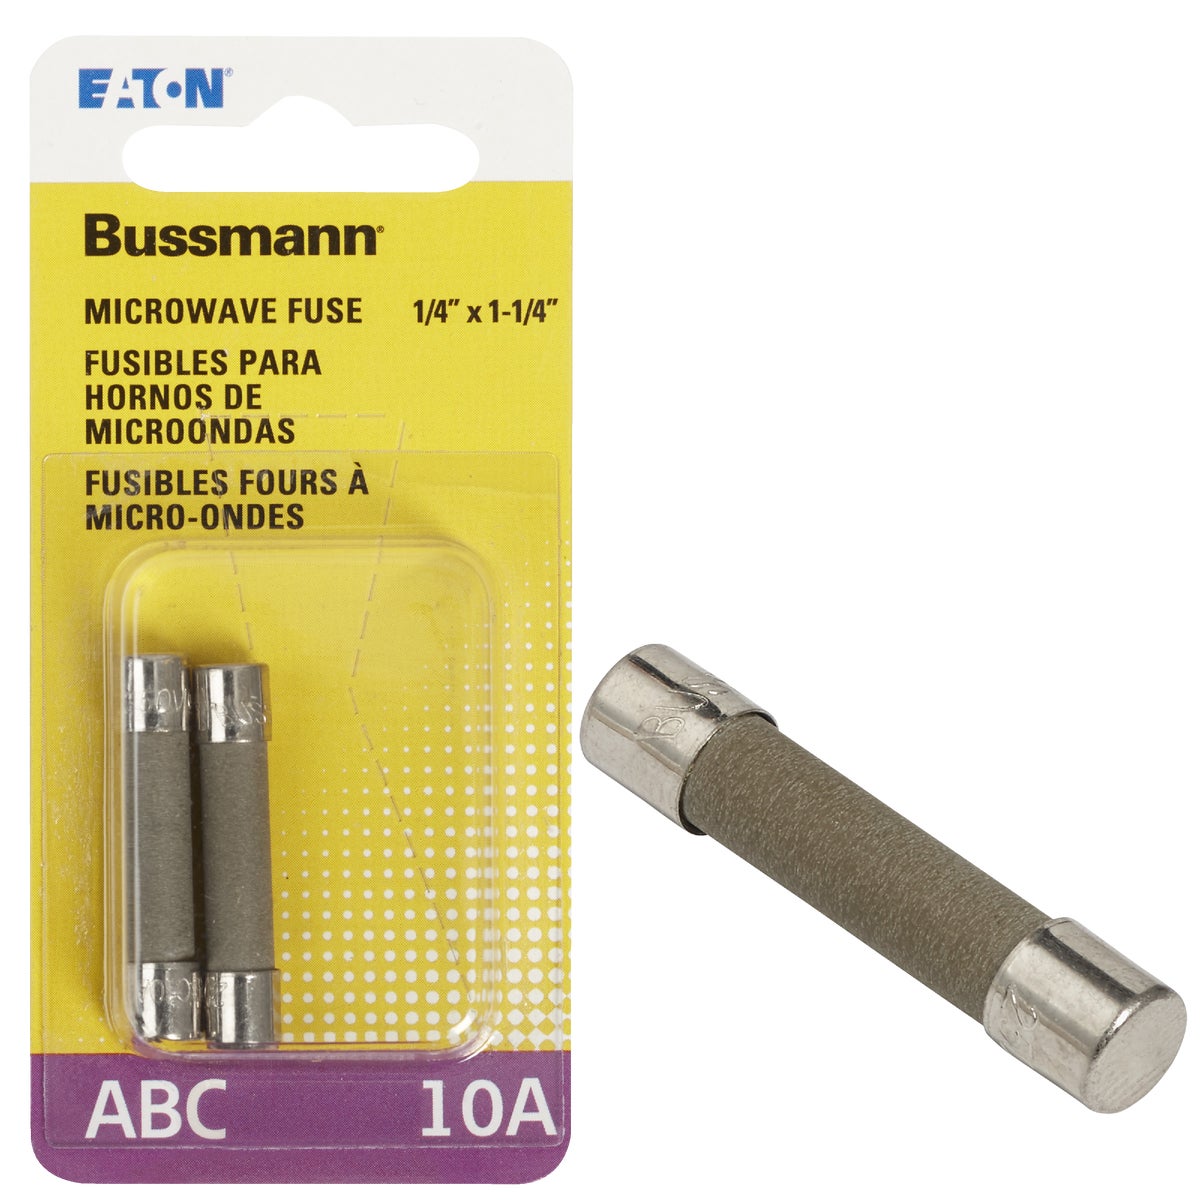 Item 527327, Fast acting ABC ceramic tube electronic fuse for use with microwave ovens.